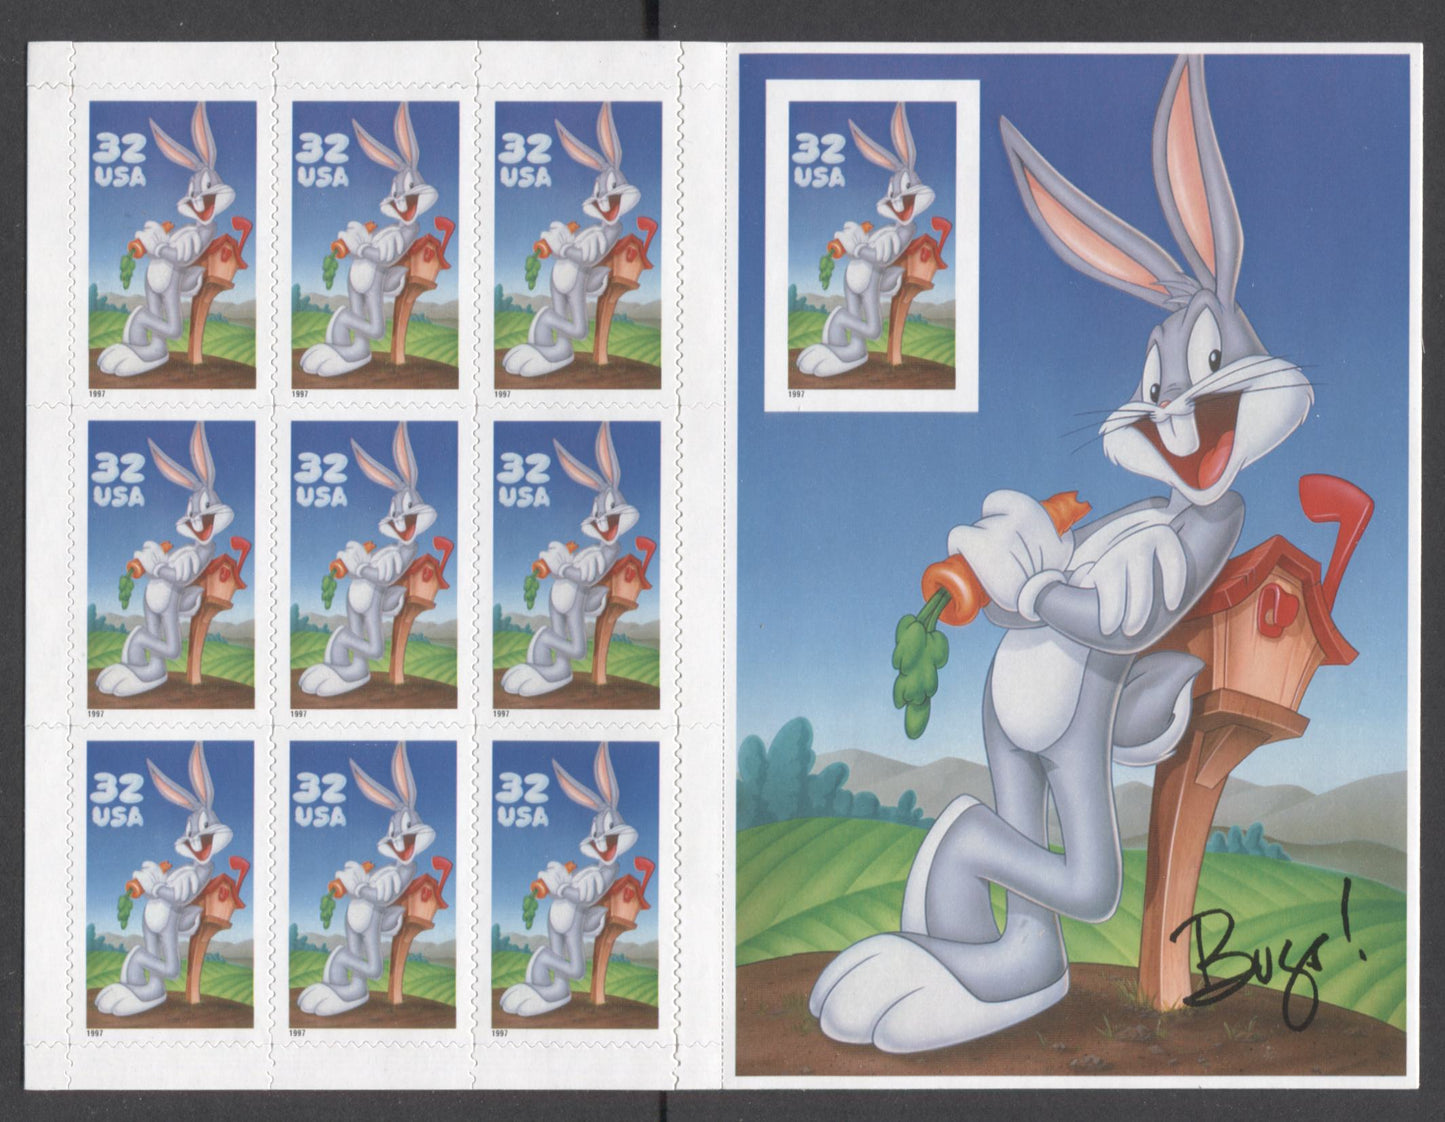 Lot 74 United States SC#3138 32c Multicolored 1997 Bugs Bunny Issue, Die Cutting Extendeds Through The Backing Paper, A VFNH Imperf Sheet Of 10, Click on Listing to See ALL Pictures, 2017 Scott Cat. $175